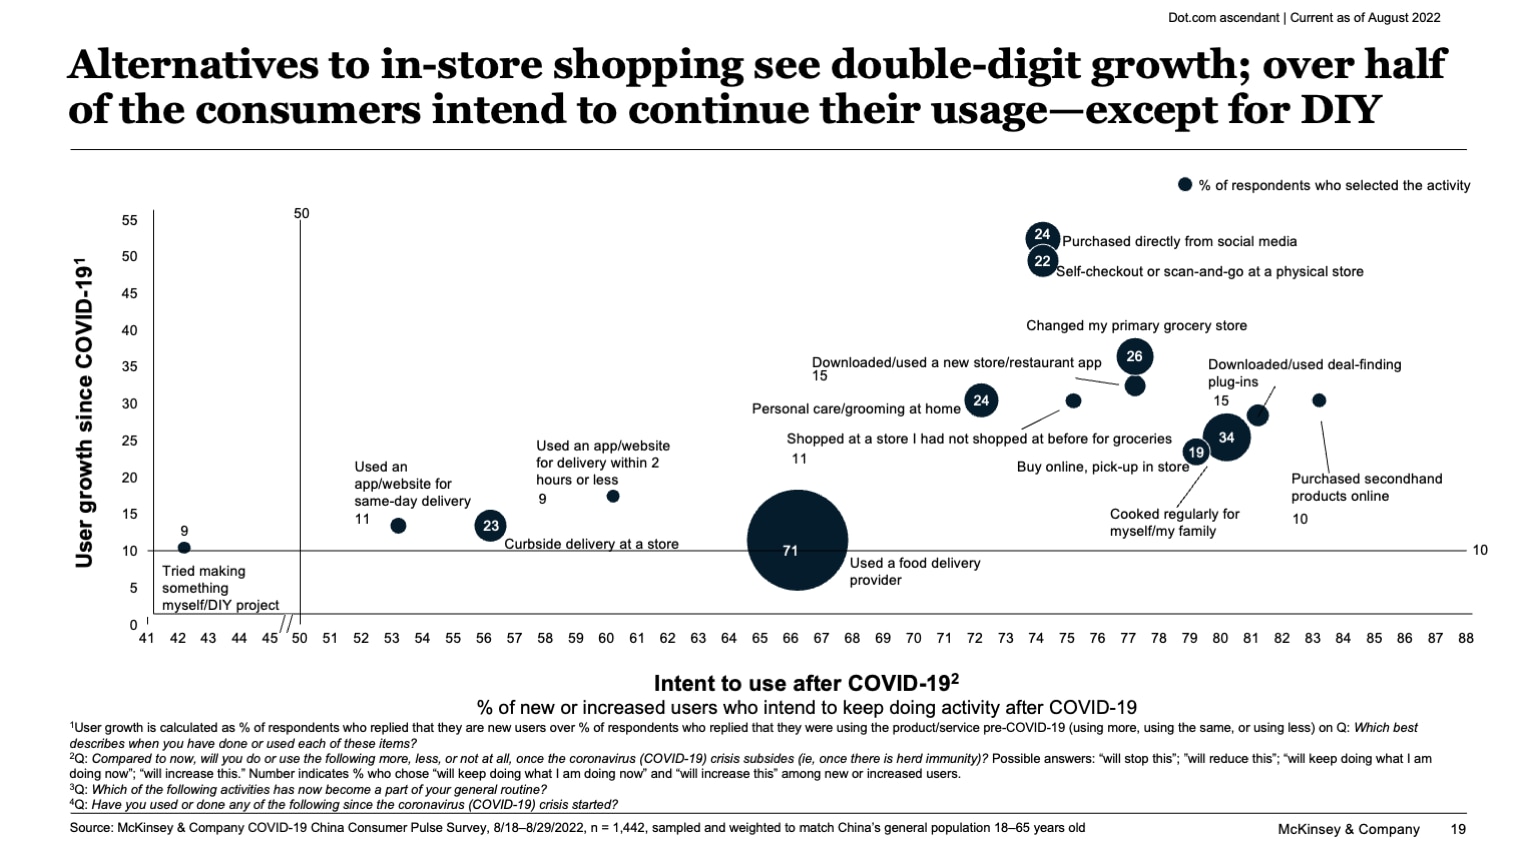 Alternatives to in-store shopping see double-digit growth; over half of the consumers intend to continue their usage--except for DIY